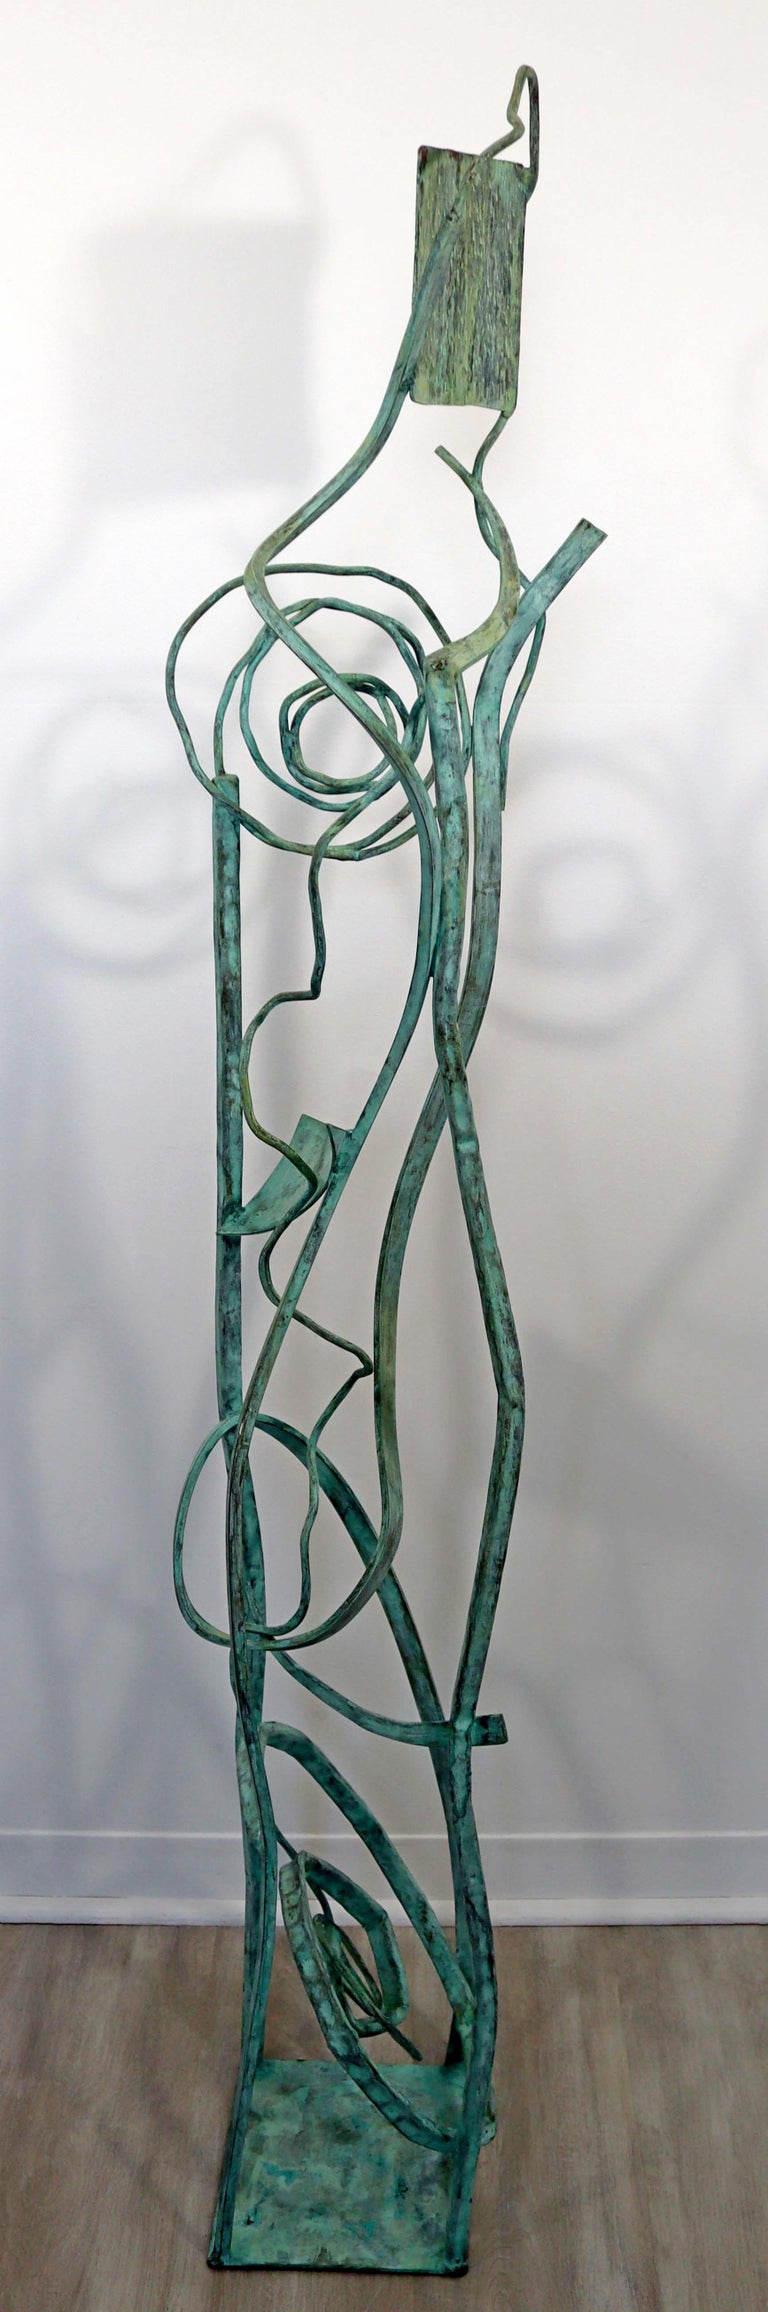 For your consideration is a magnificent, forged painted copper metal, abstract floor sculpture, by artist Robert D. Hansen. In excellent condition. The dimensions are 11.5